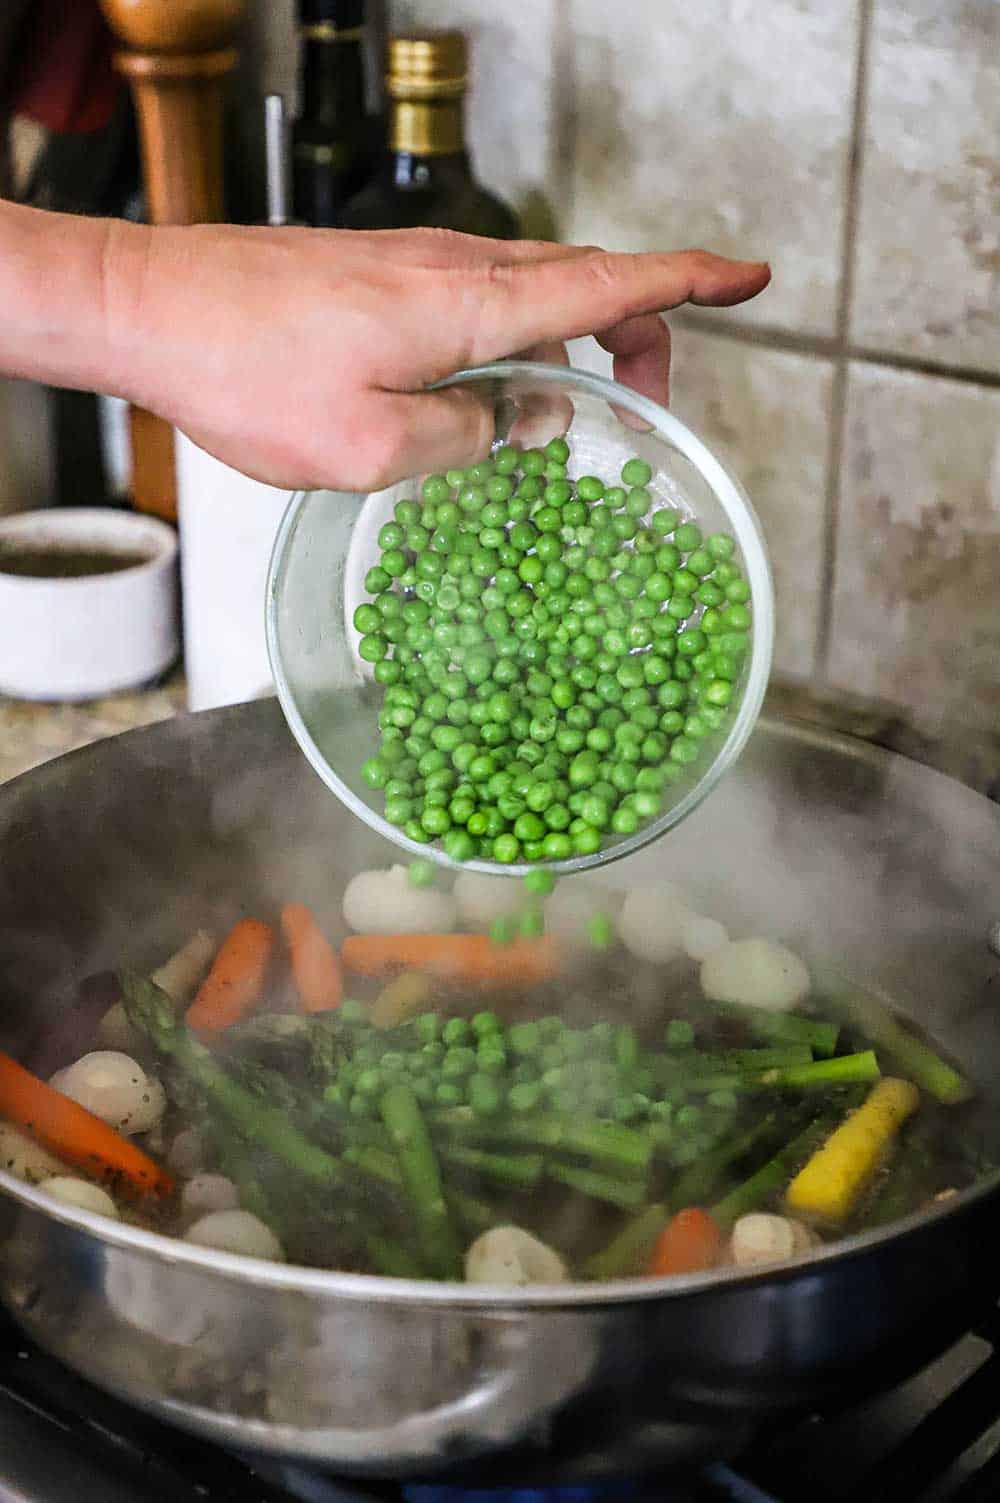 A person transferring sweet peas from a small glass bowl into a pot of simmering vegetables including carrots, asparagus, and pearl onions.